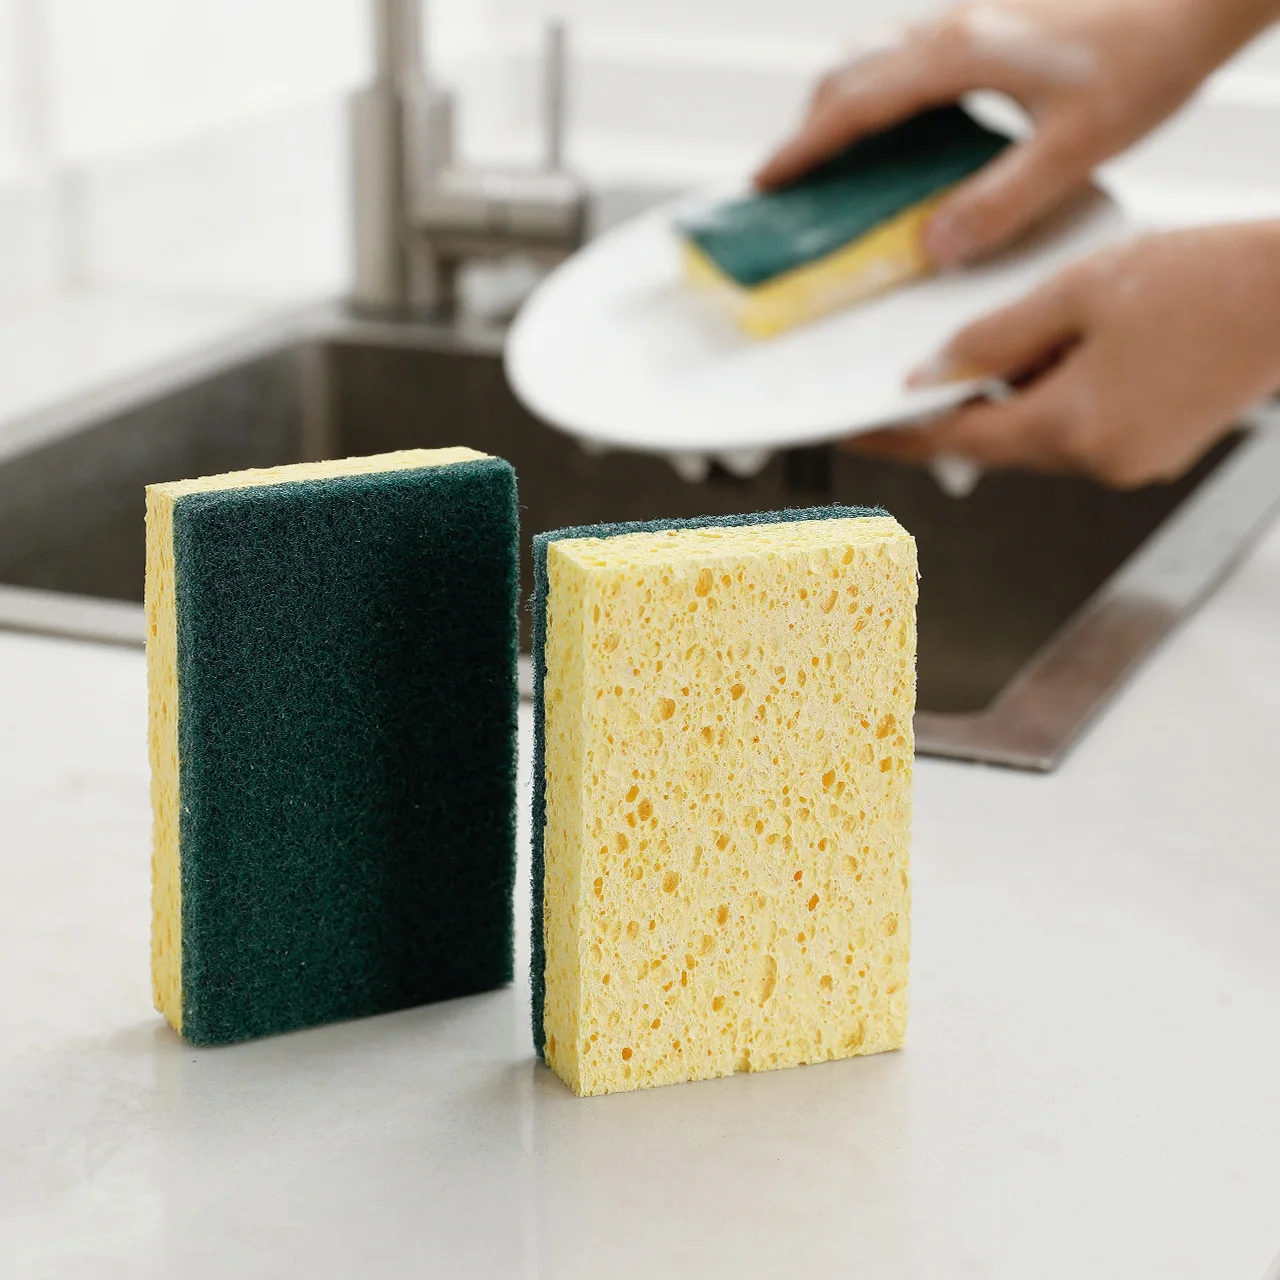 

SHIMOYAMA 2 pack Wholesale Heavy Duty Scouring Scrubbing Side and Absorbent Side Cleaning Sponge for Kitchen Dishes Tables, Picture